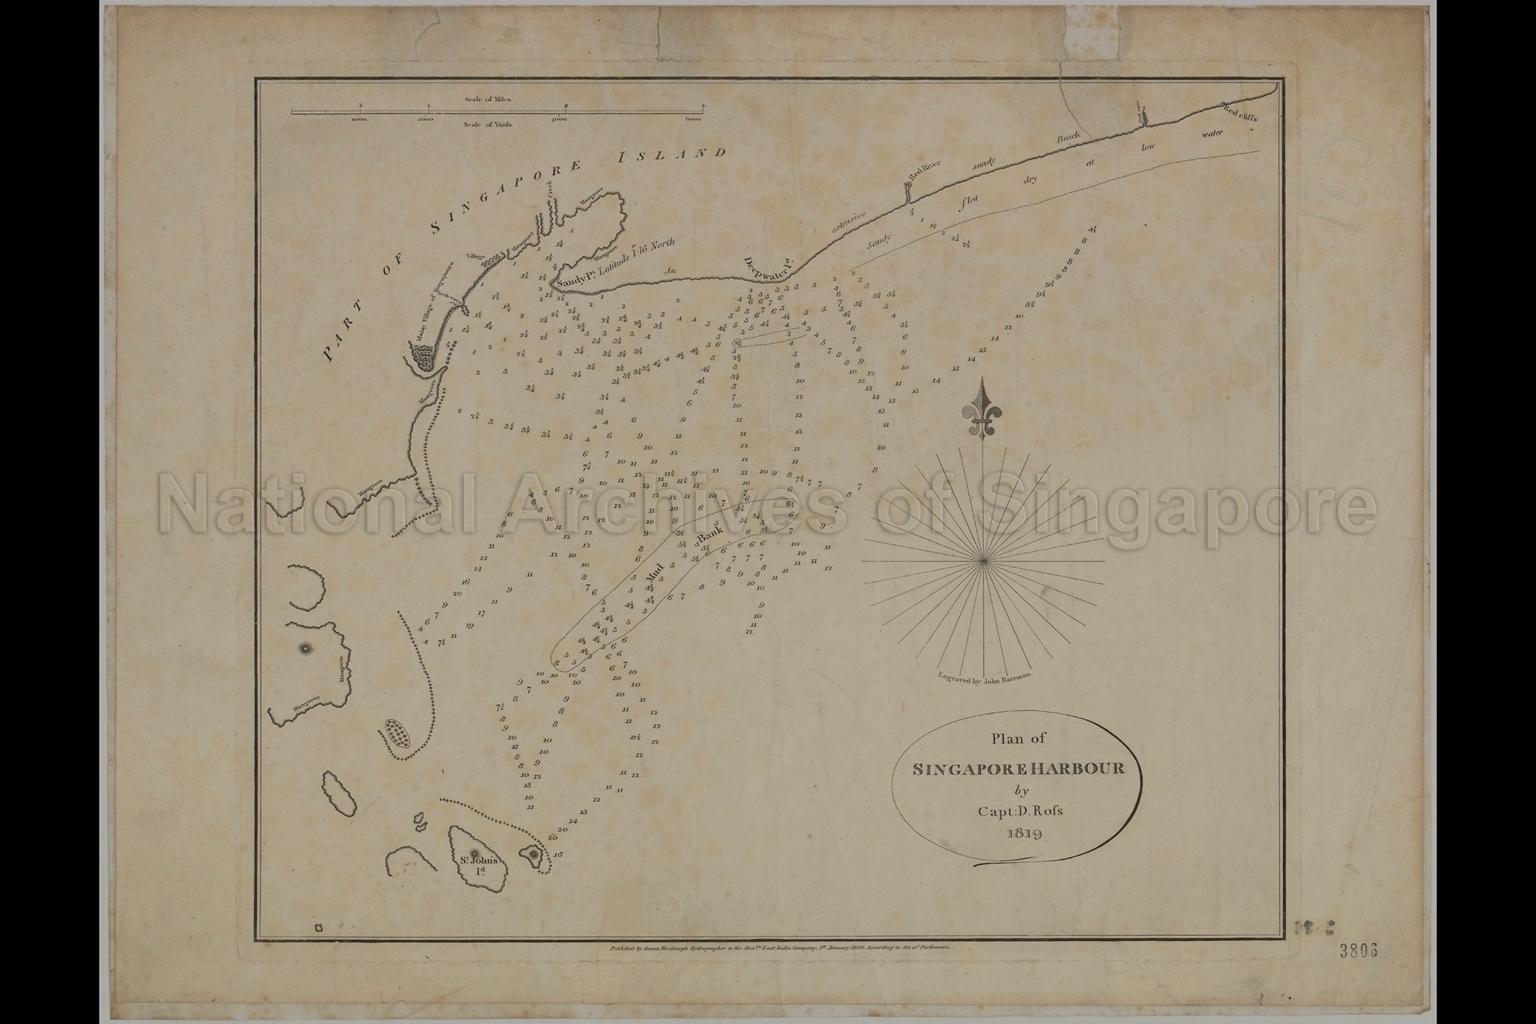 Plan Of Singapore Harbour By Captain D. Ross (Rofs)